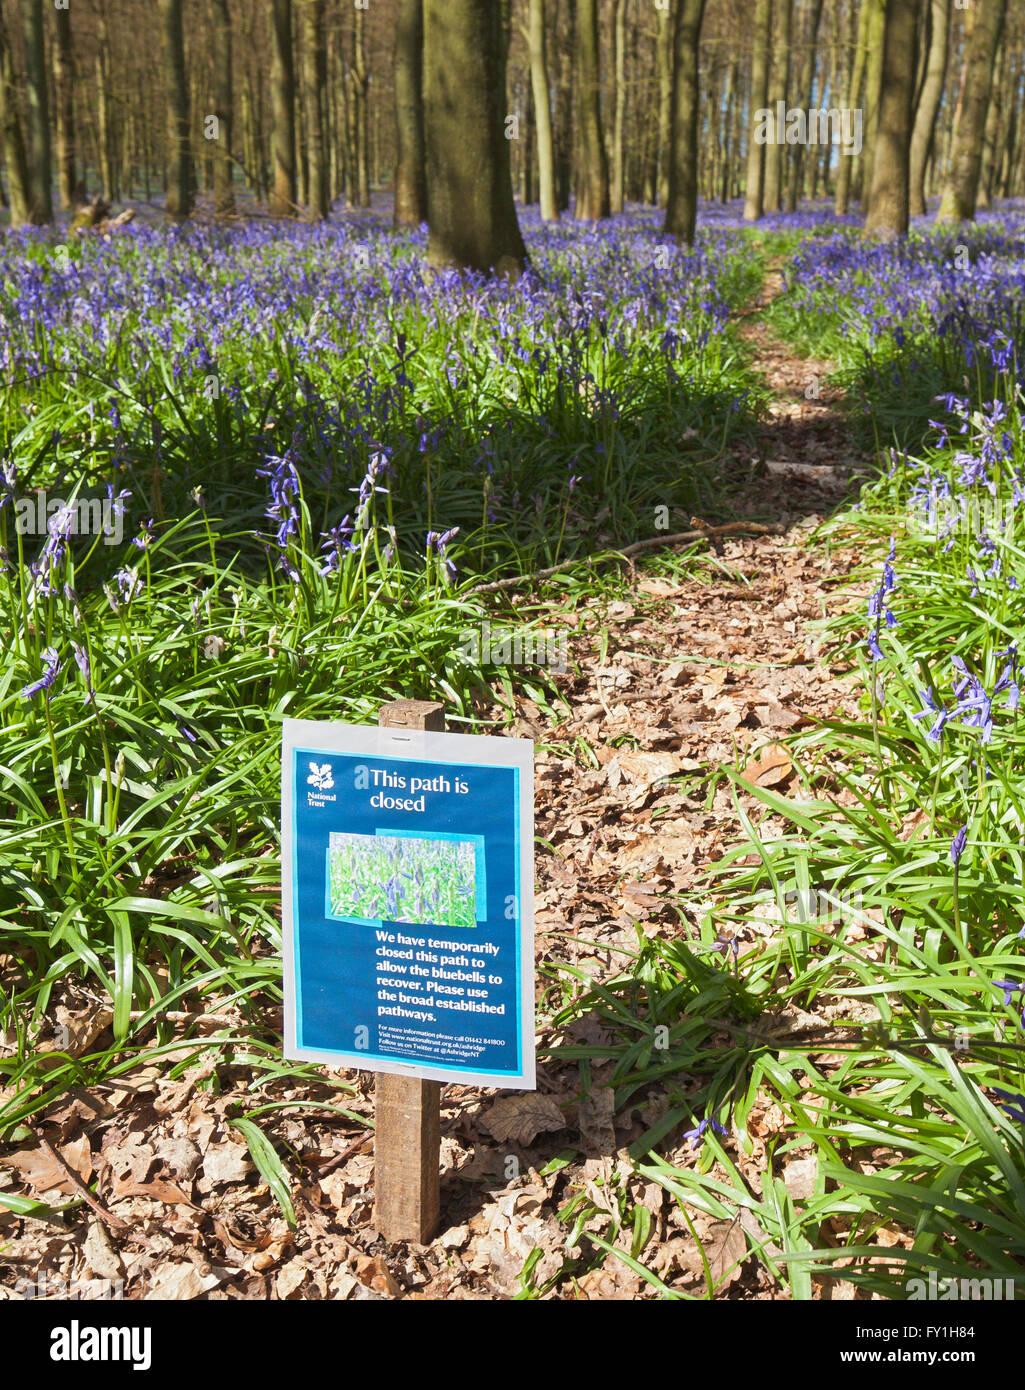 Dockey Wood, Ashridge Estate, Berkhamsted, Hertfordshire, England, UK. 20th April 2016. Due to problems with the bluebells getting trampled, the National Trust has closed some of the paths and are charging a fee of £3 to see this years display. Stock Photo